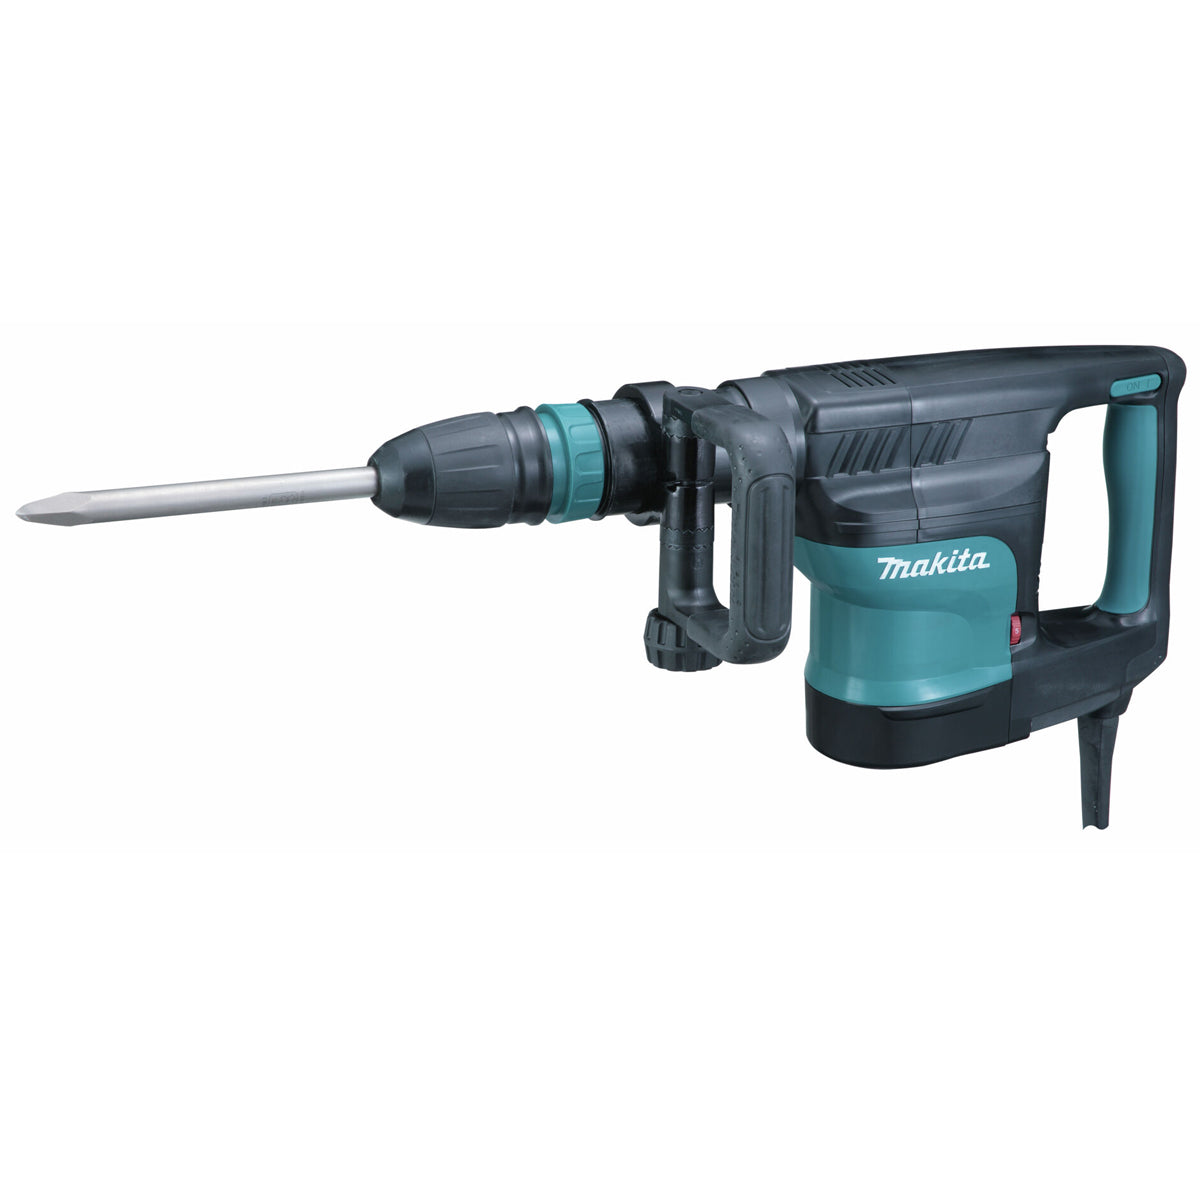 Makita HM1101C/2 SDS-MAX Demolition Hammer Drill With Carrying Case 240V